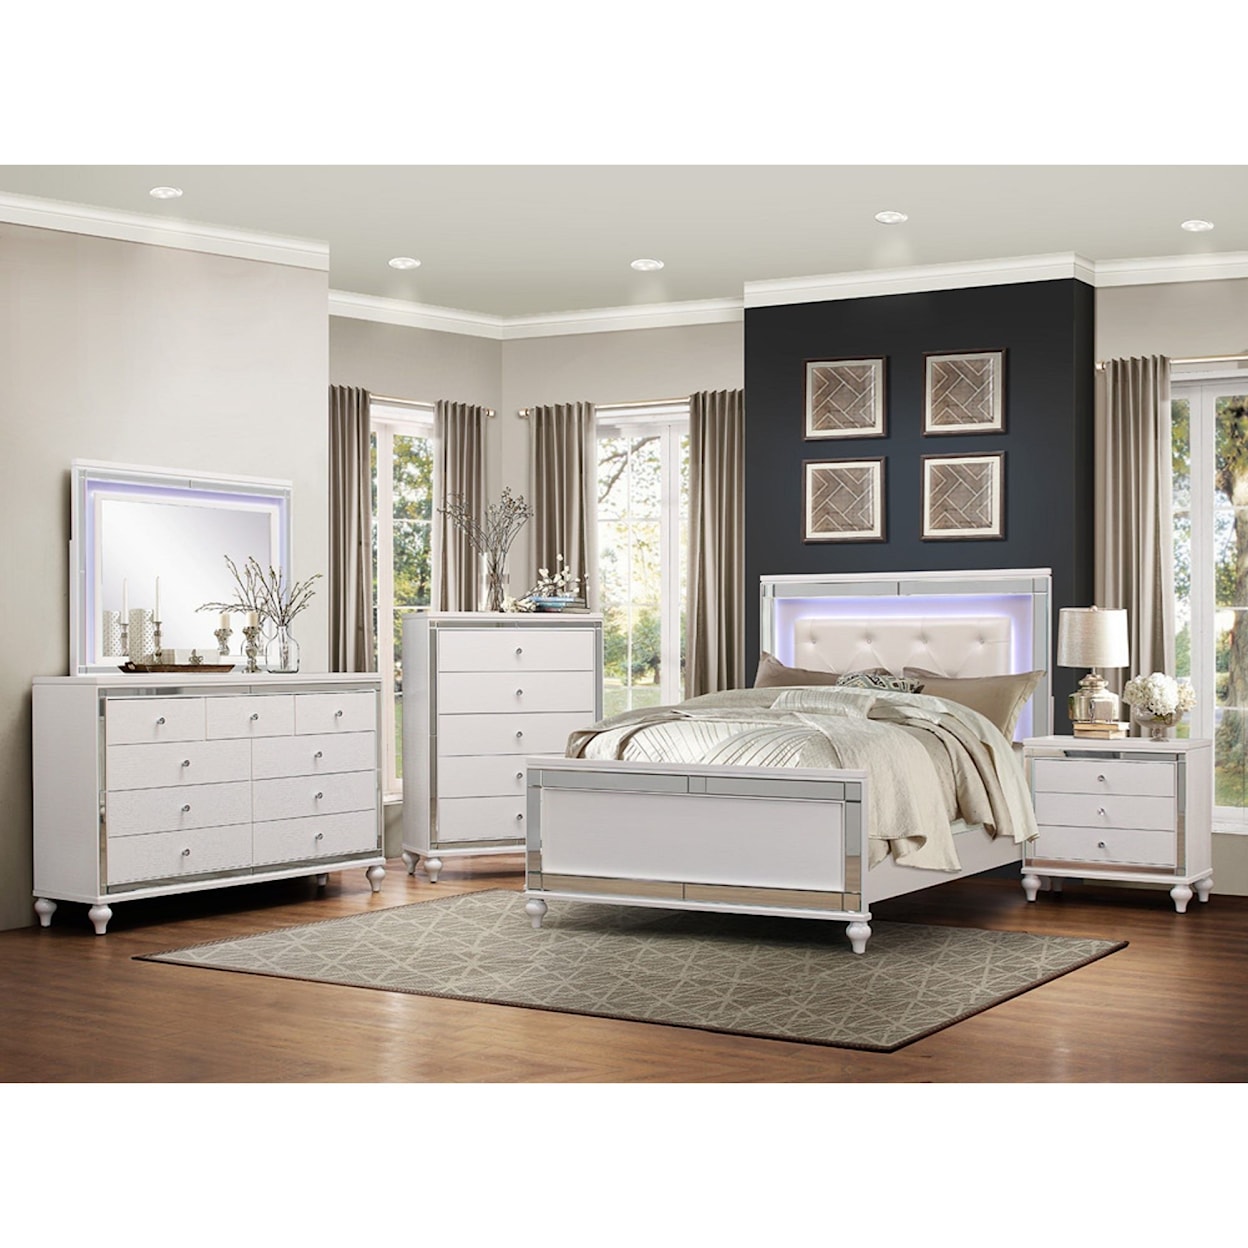 Homelegance Furniture Alonza Cal King Bedroom Group without Chest